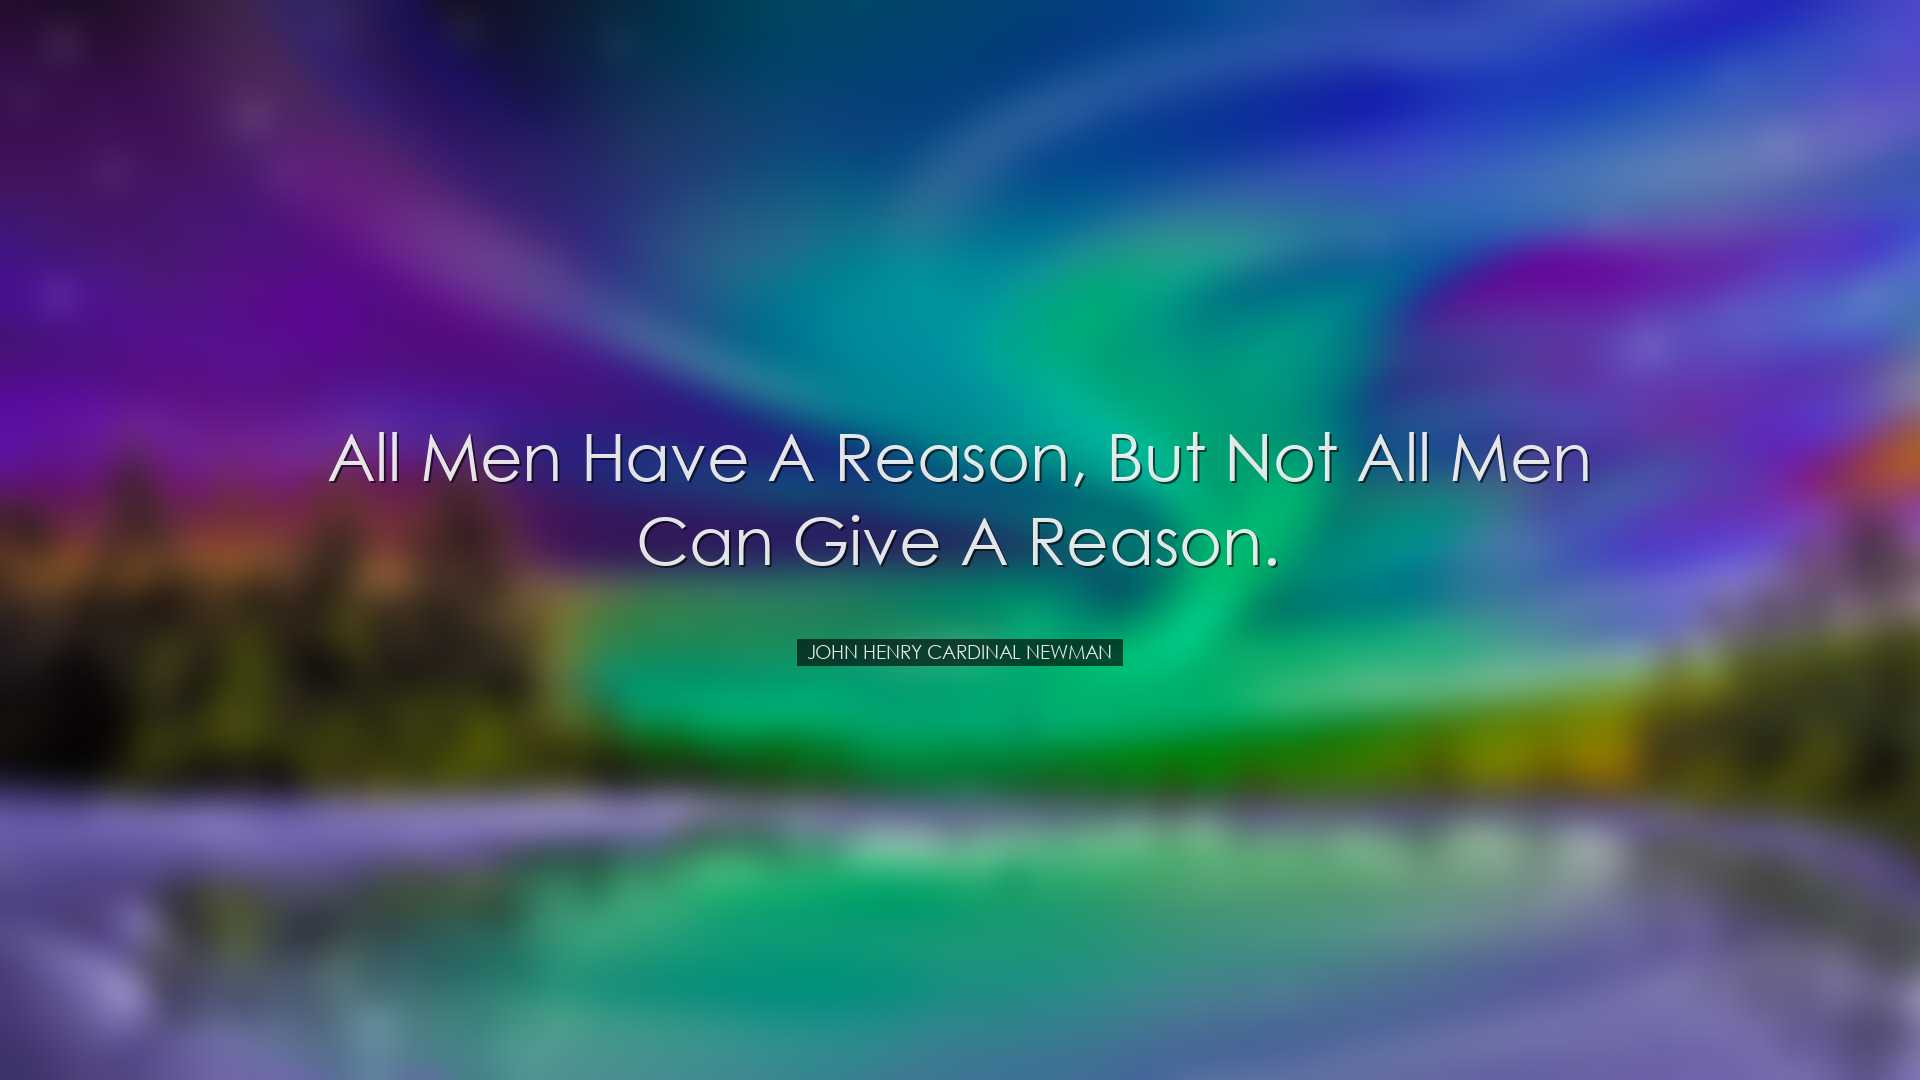 All men have a reason, but not all men can give a reason. - John H